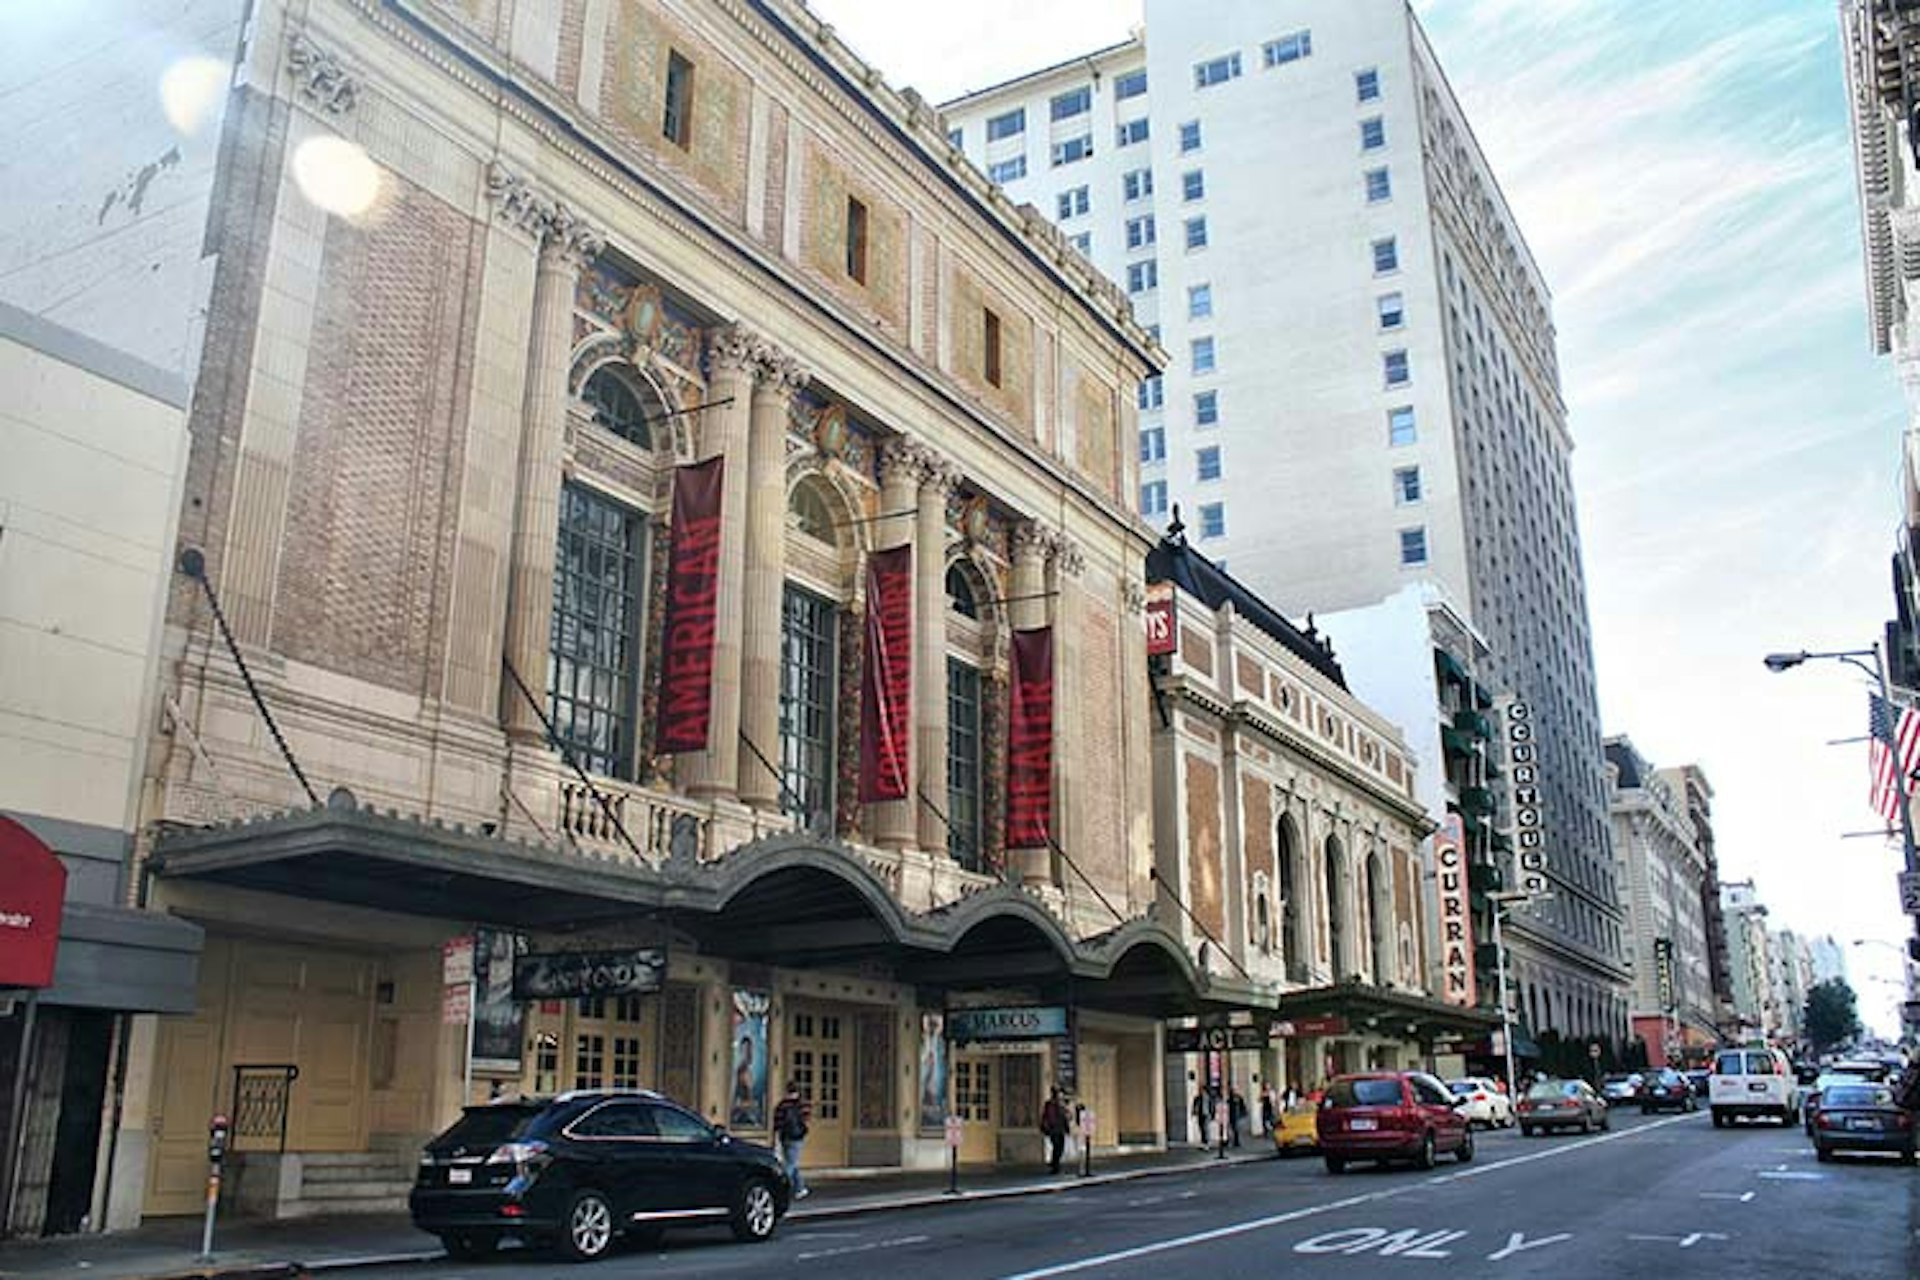 American Conservatory Theater in San Francisco. Image by John Martinez Pavliga / CC BY 2.0